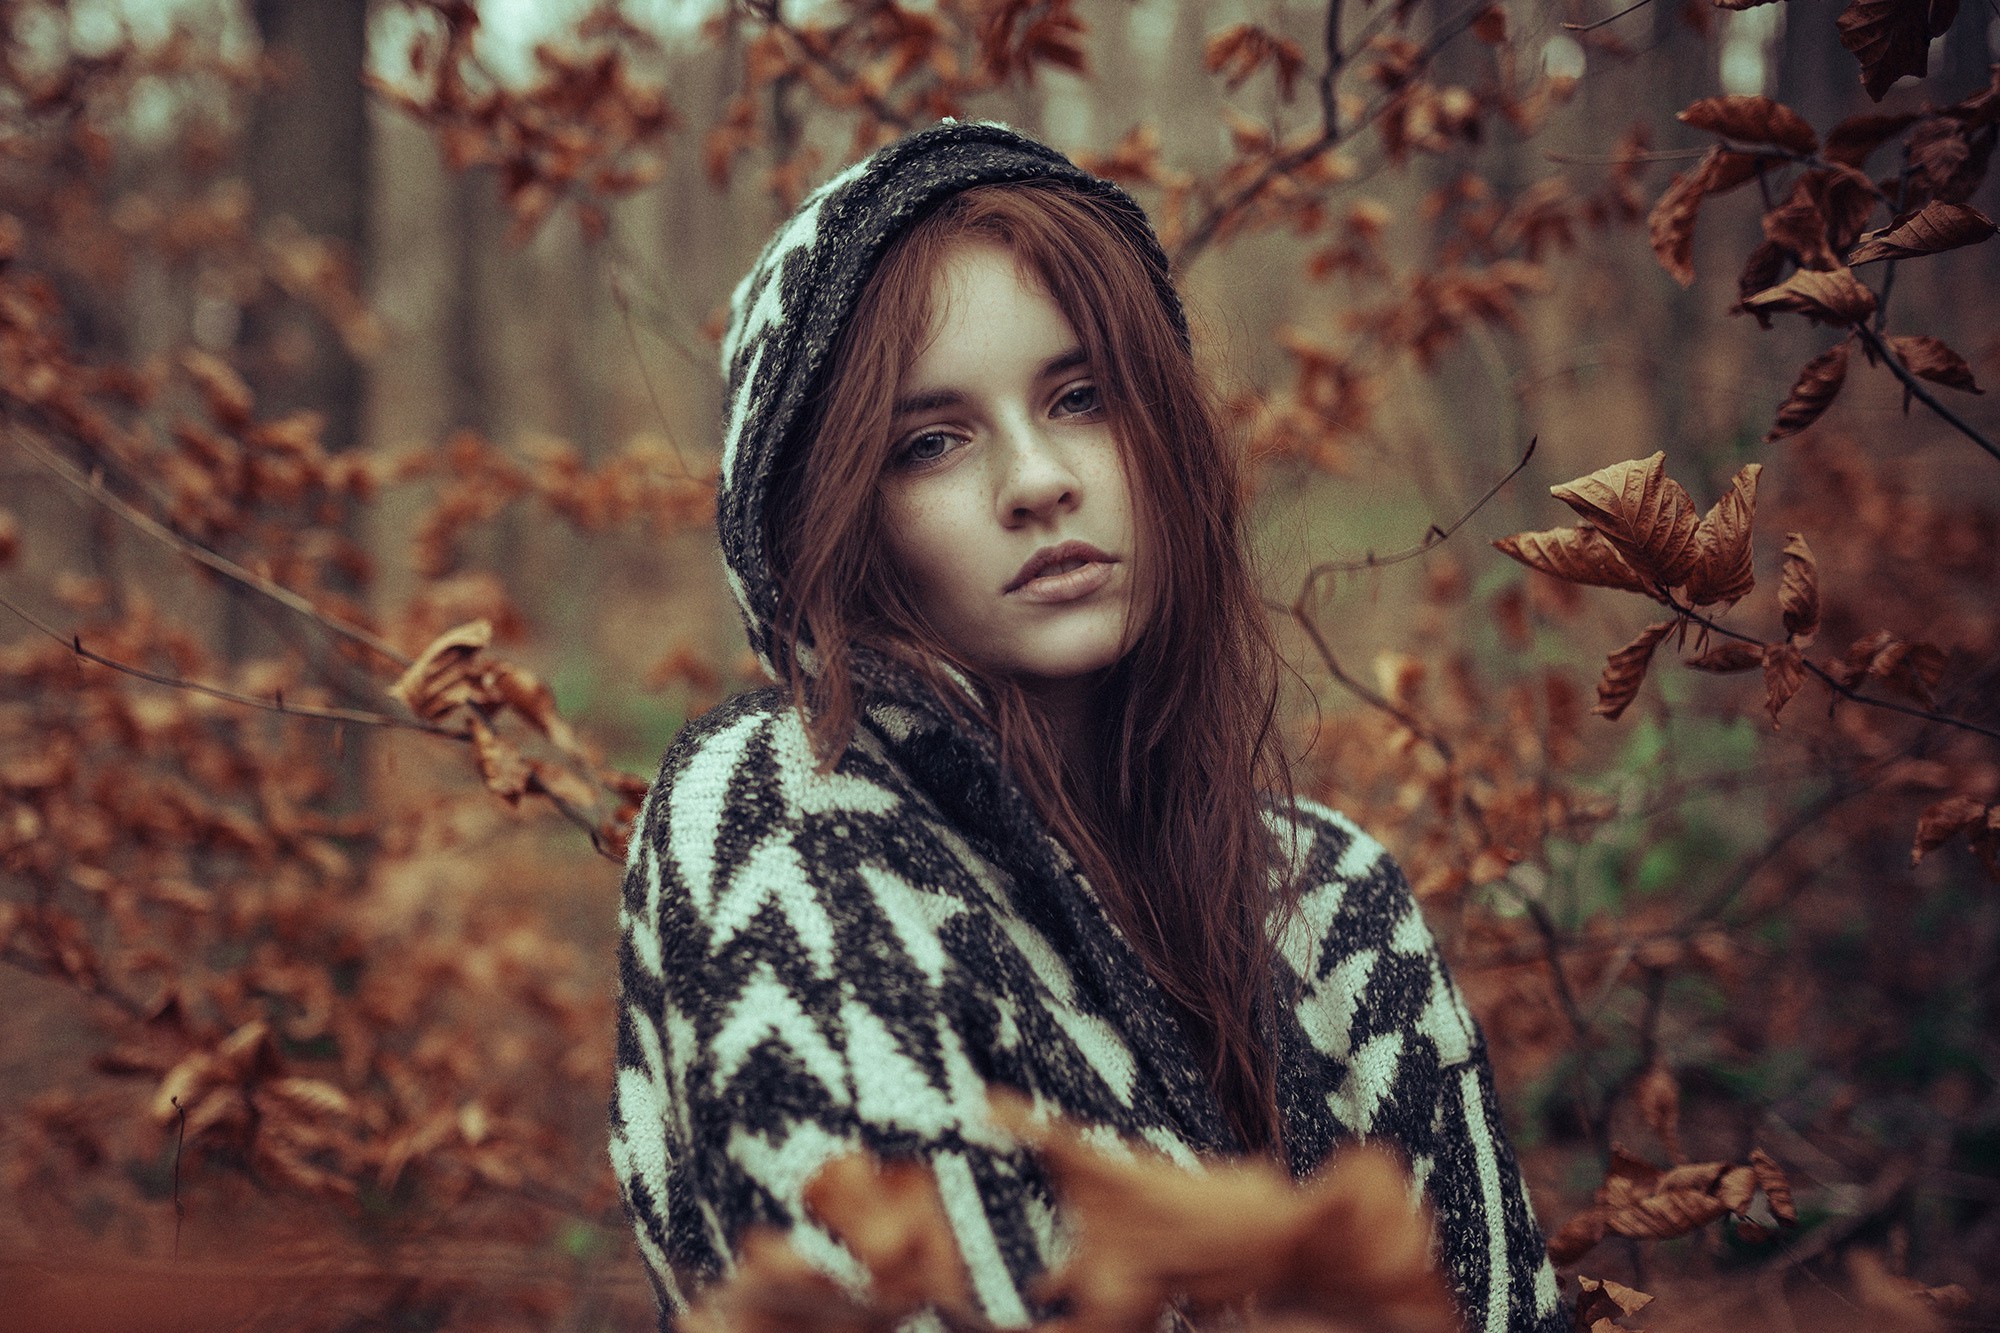 women, Model, Redhead, Long Hair, Women Outdoors, Looking At Viewer, Nature, Trees, Forest, Sweater, Leaves, Branch, Fall, Hoods, Open Mouth, Freckles, Depth Of Field Wallpaper